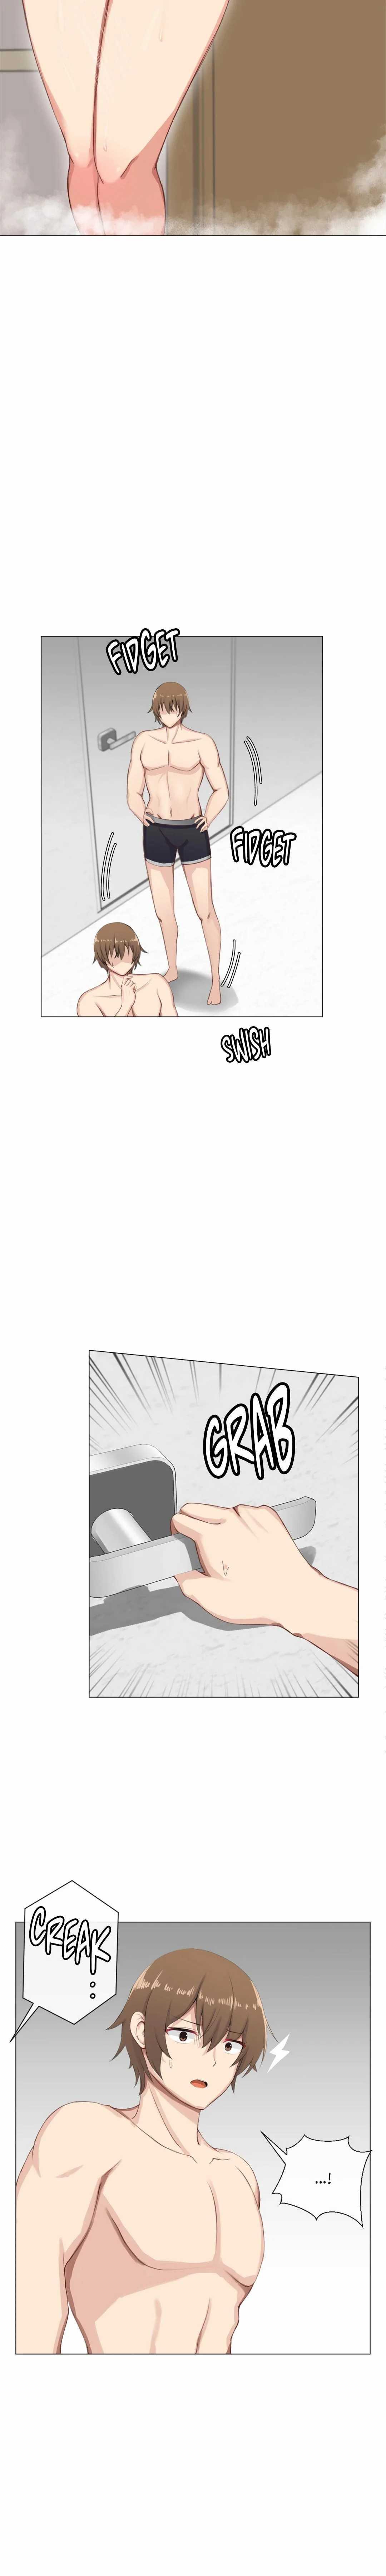 [Dumangoon, 130F] Sexcape Room: Pile Up Ch.9/9 [English] [Manhwa PDF] Completed 104